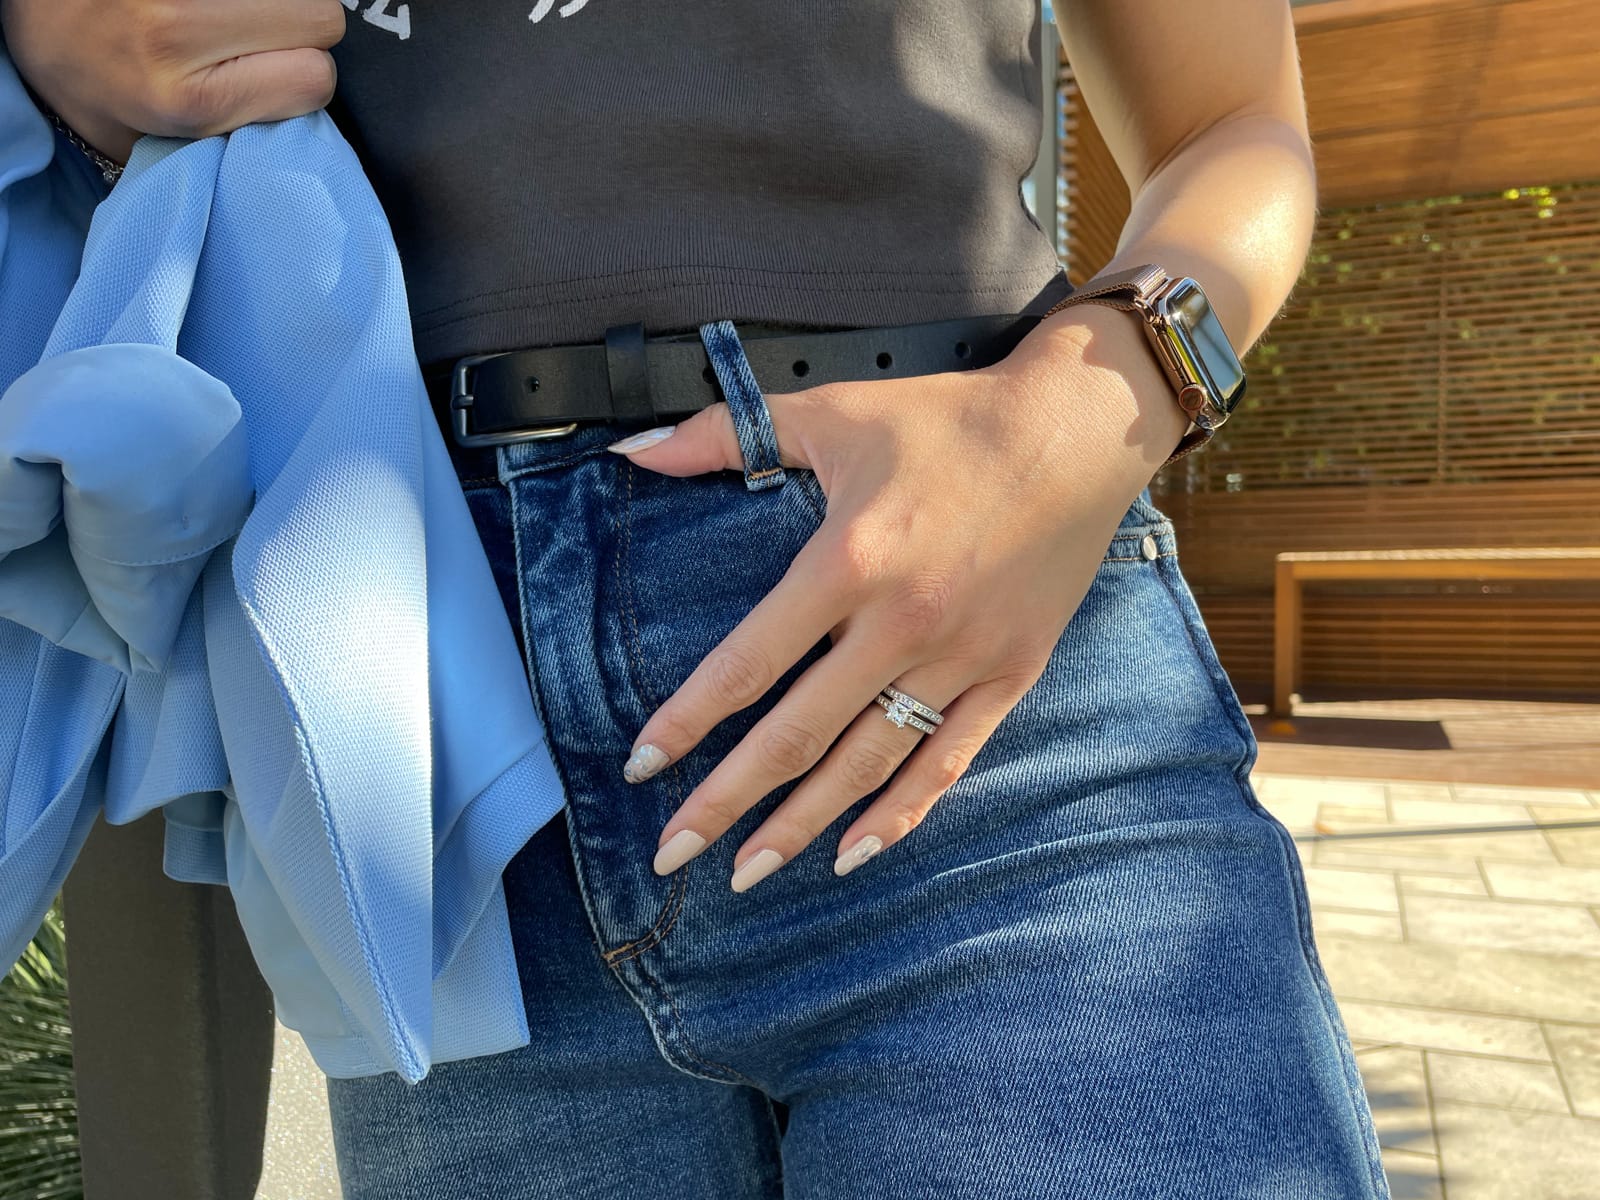 A close-up of a woman’s hand with her thumb through the belt loop on her blue jeans. She has a set of silver wedding rings on her fourth finger and her nails are light nude coloured with some silver accents. She is wearing a gold watch on her wrist.